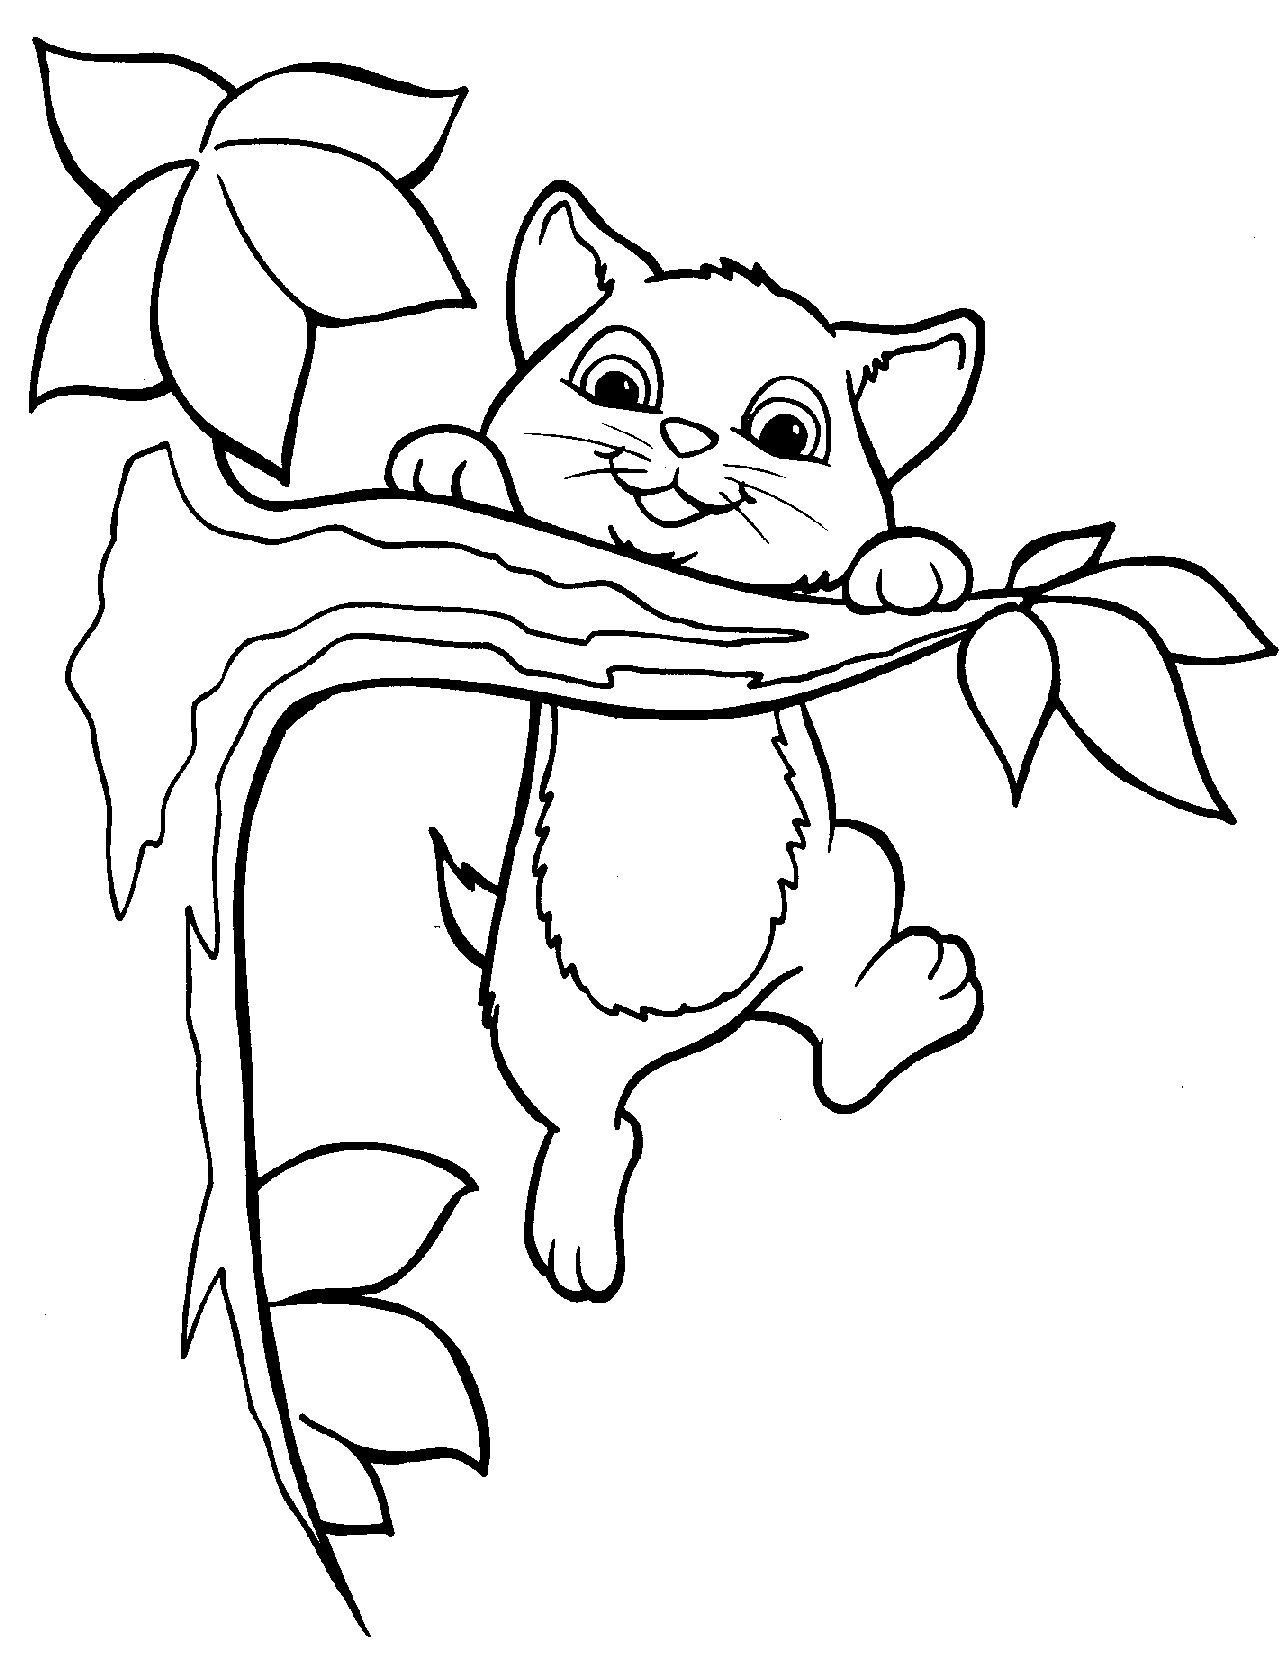 coloring pages of kittens to print meowing kitten coloring page free printable coloring pages print to pages kittens of coloring 